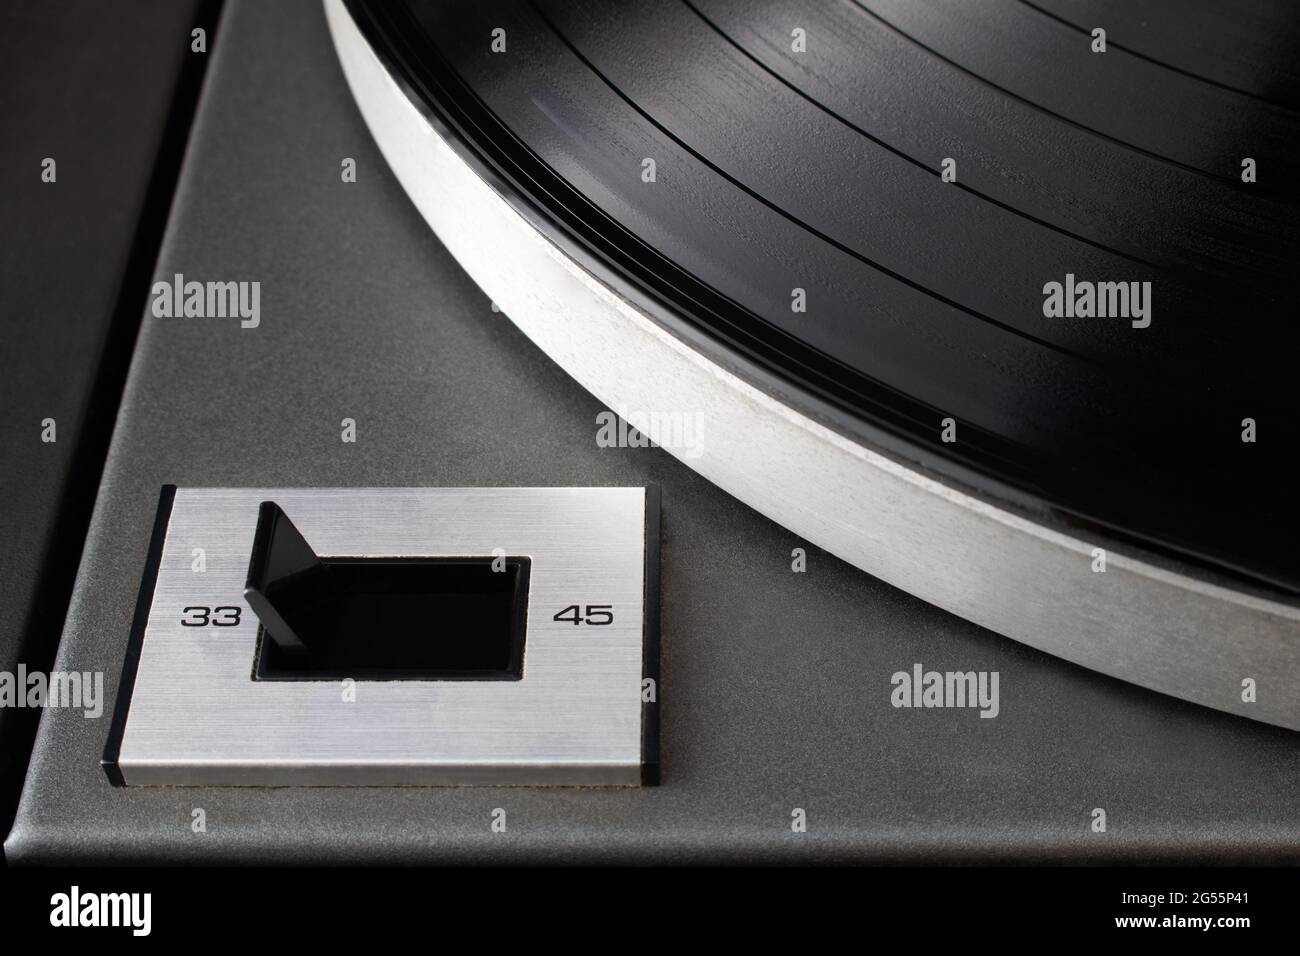 Close-up of speed rotation switch set to 33 RPM on vintage turntable vinyl record player Stock Photo